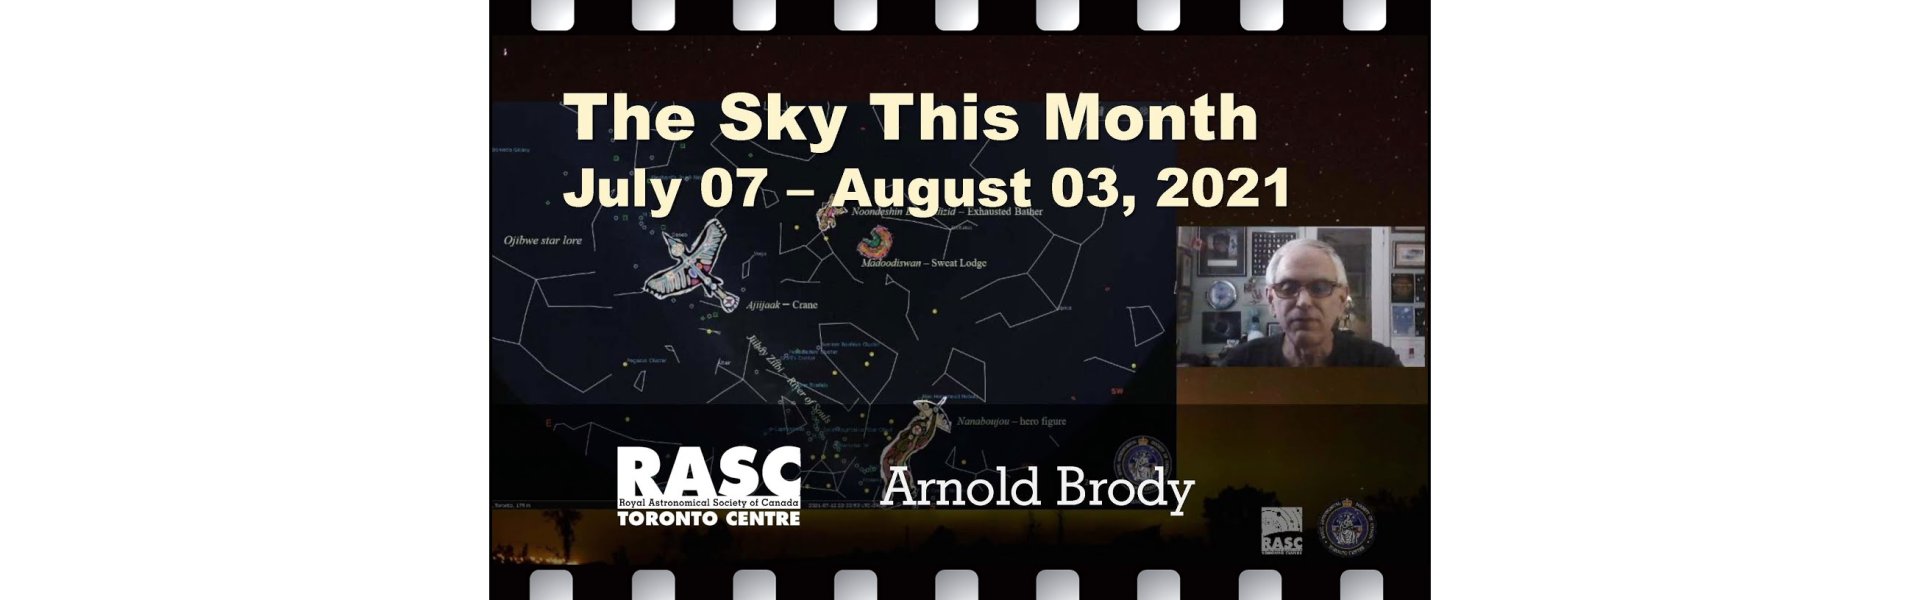 The Sky This Month July 7 - August 3, 2021